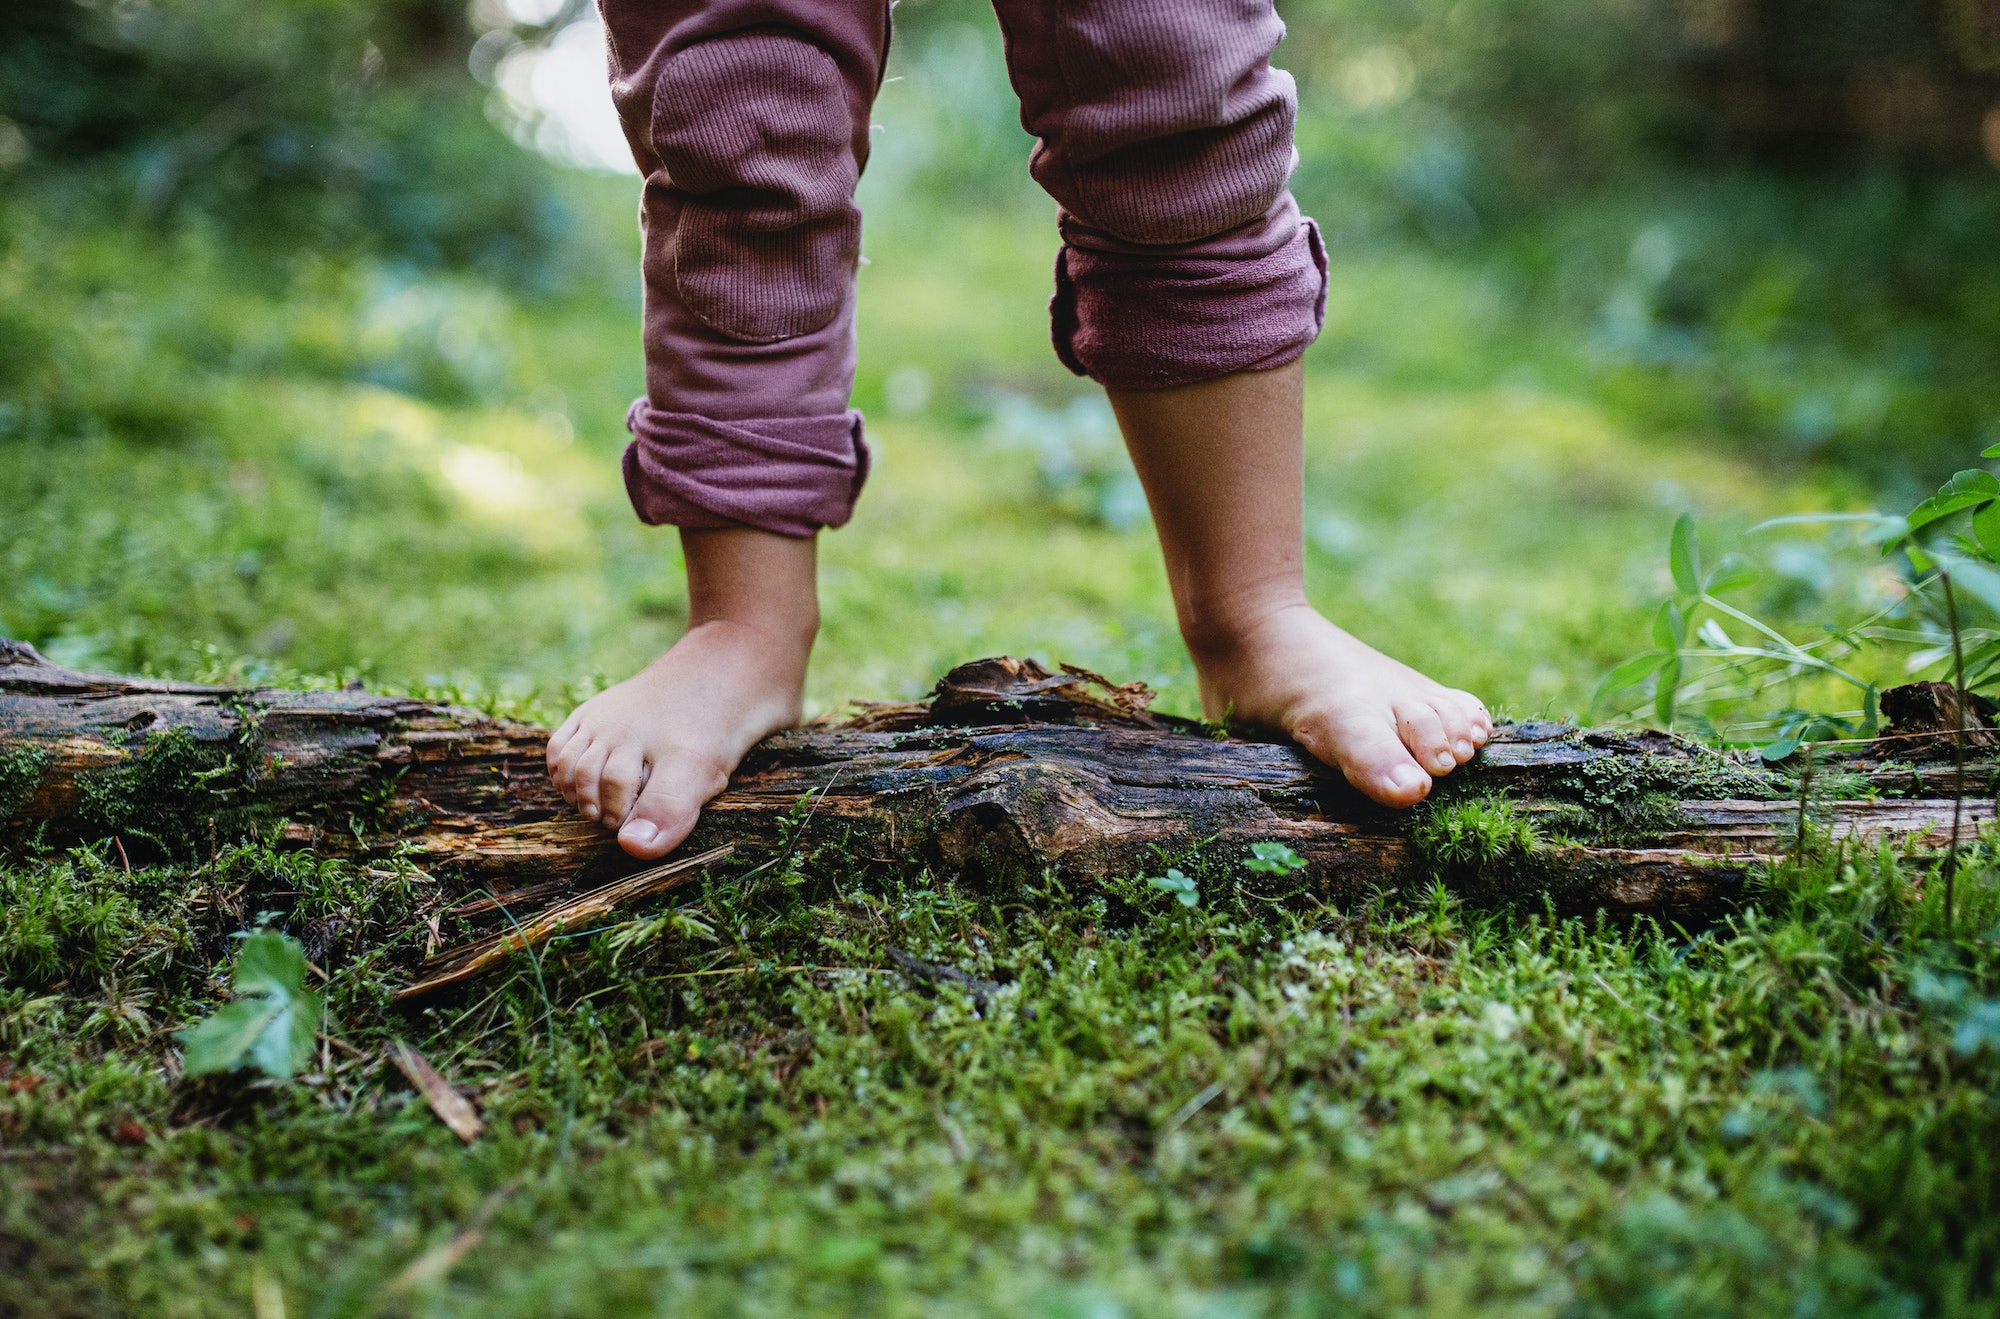 Bare feet of small child standing barefoot outdoors in nature, grounding concept